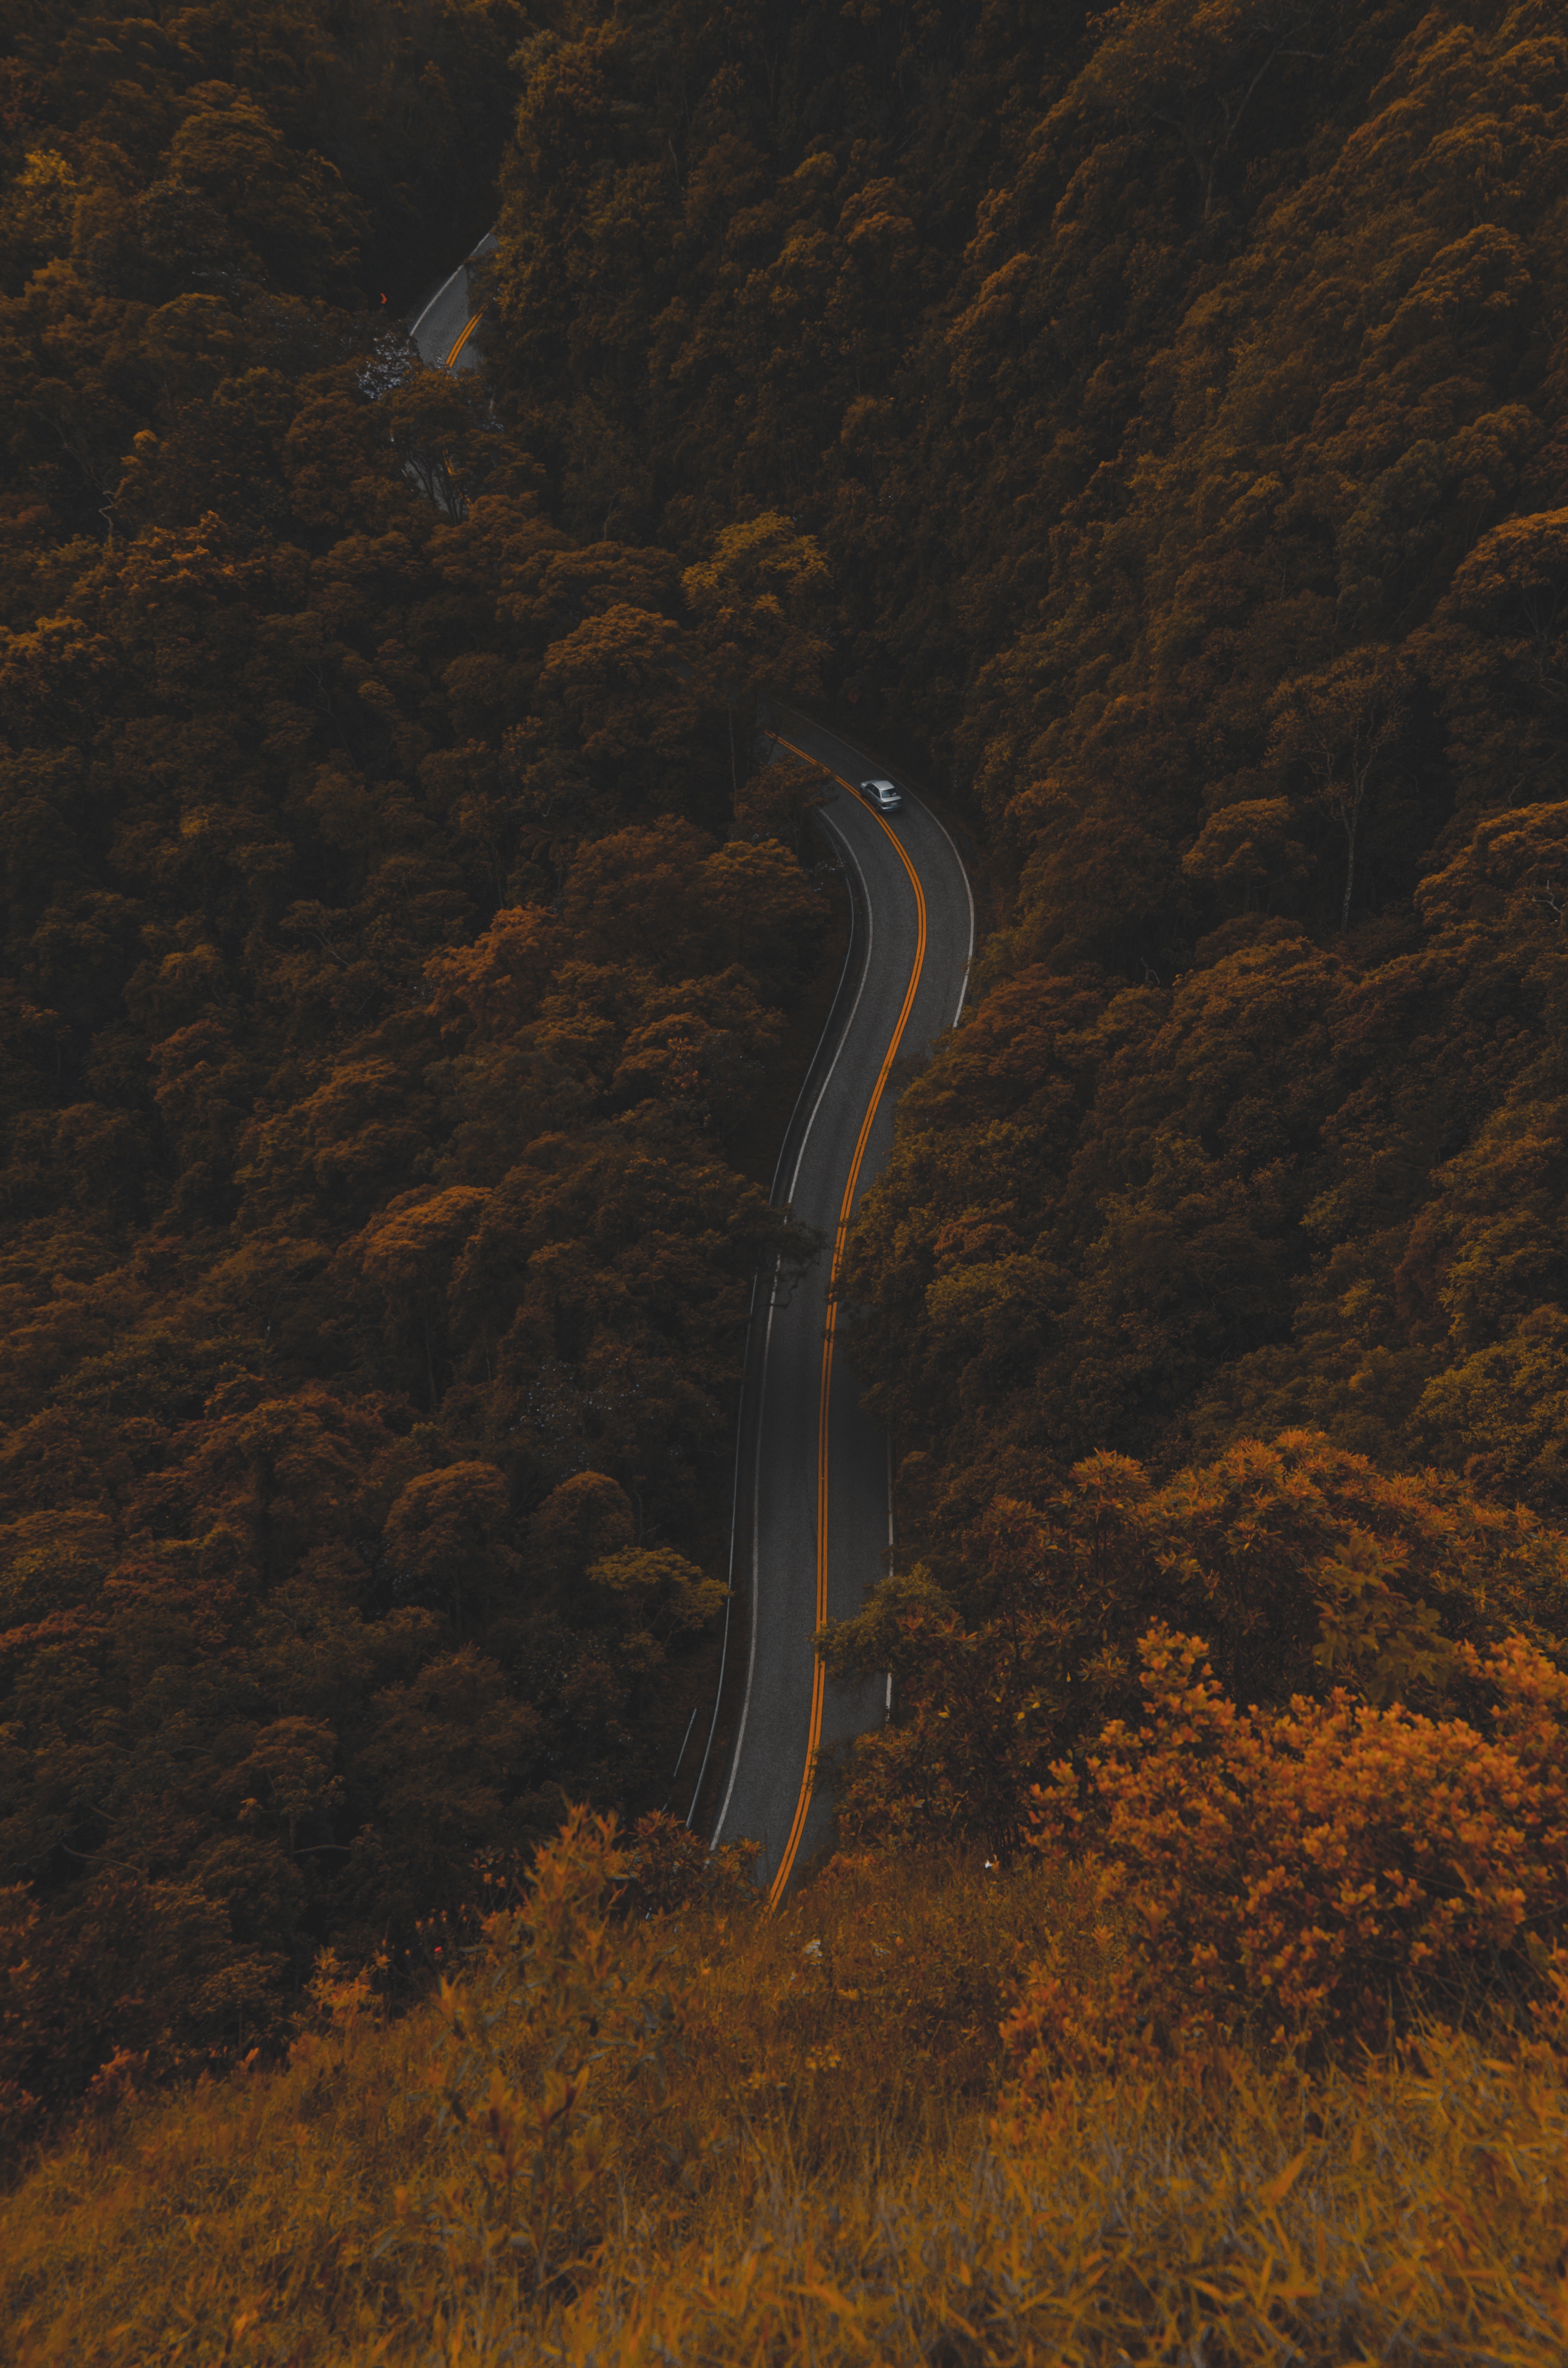 foliage, nature, autumn, view from above, road, forest Image for desktop